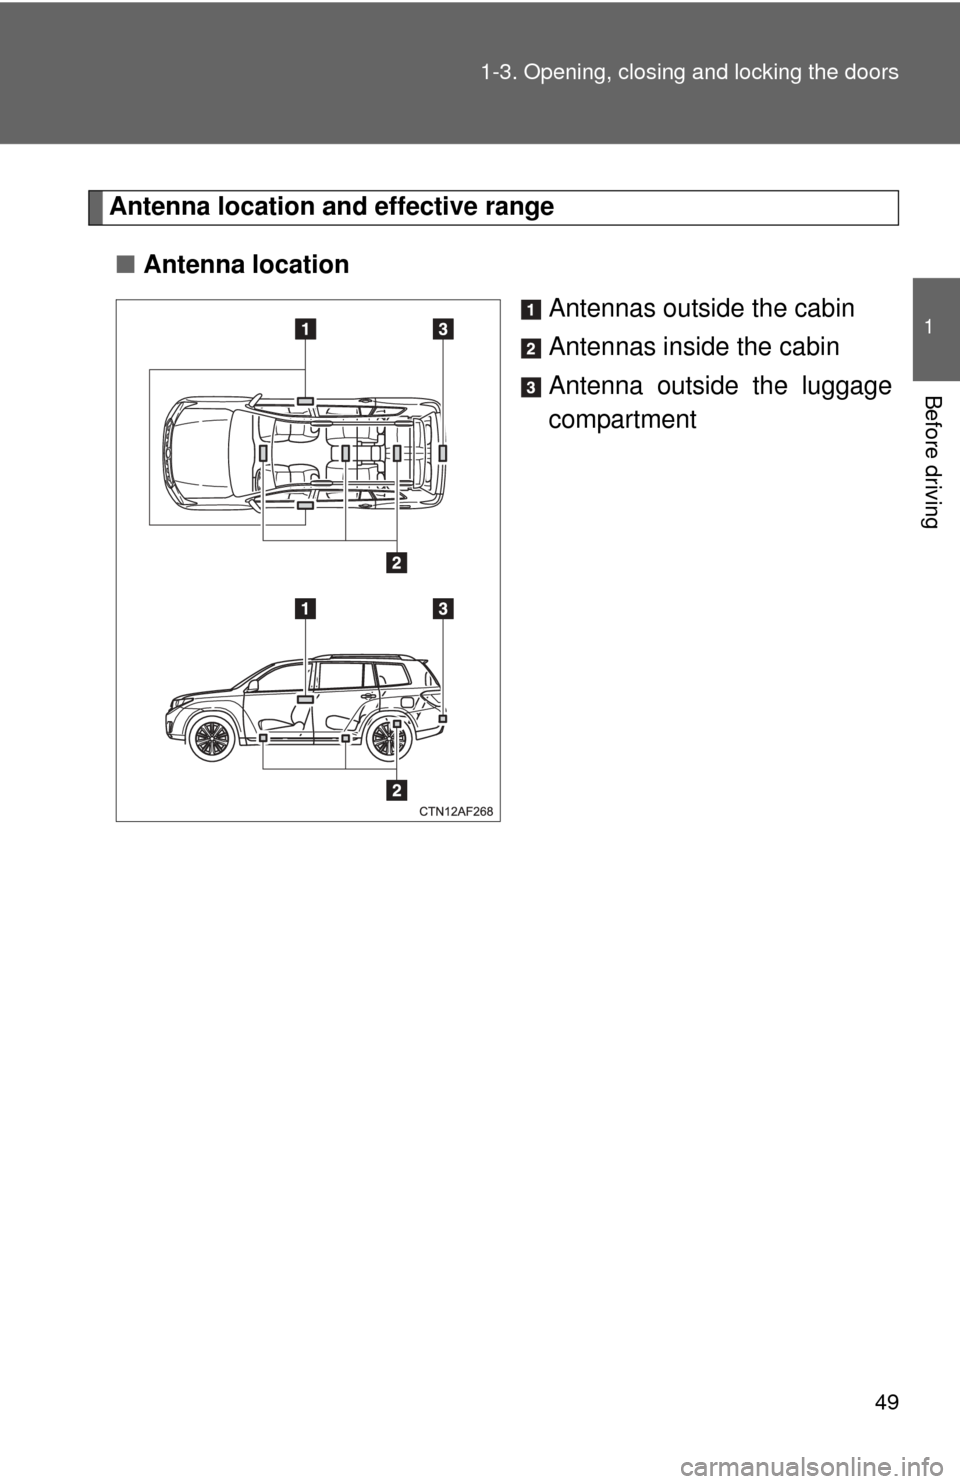 TOYOTA HIGHLANDER HYBRID 2012 XU40 / 2.G Service Manual 49
1-3. Opening, closing and locking the doors
1
Before driving
Antenna location a
nd effective range
■ Antenna location
Antennas outside the cabin
Antennas inside the cabin
Antenna outside the lugg